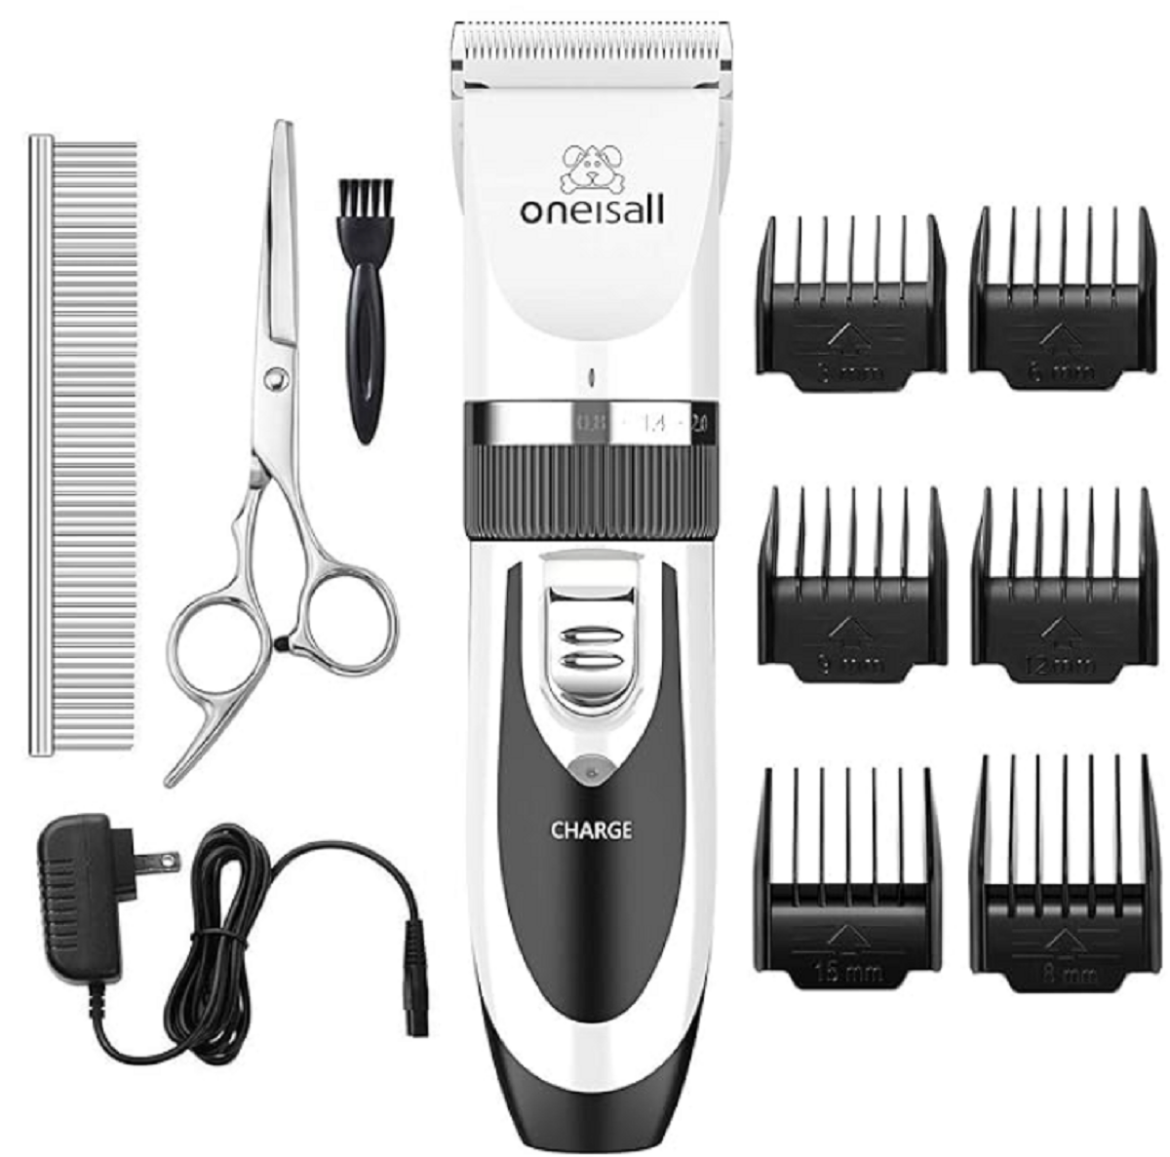 oneisall-Dog-Shaver-Clippers-Low-Noise-Rechargeable-Cordless-Electric-Quiet-Hair-Clippers-Set-for-Dogs-Cats-Pets, Clippers